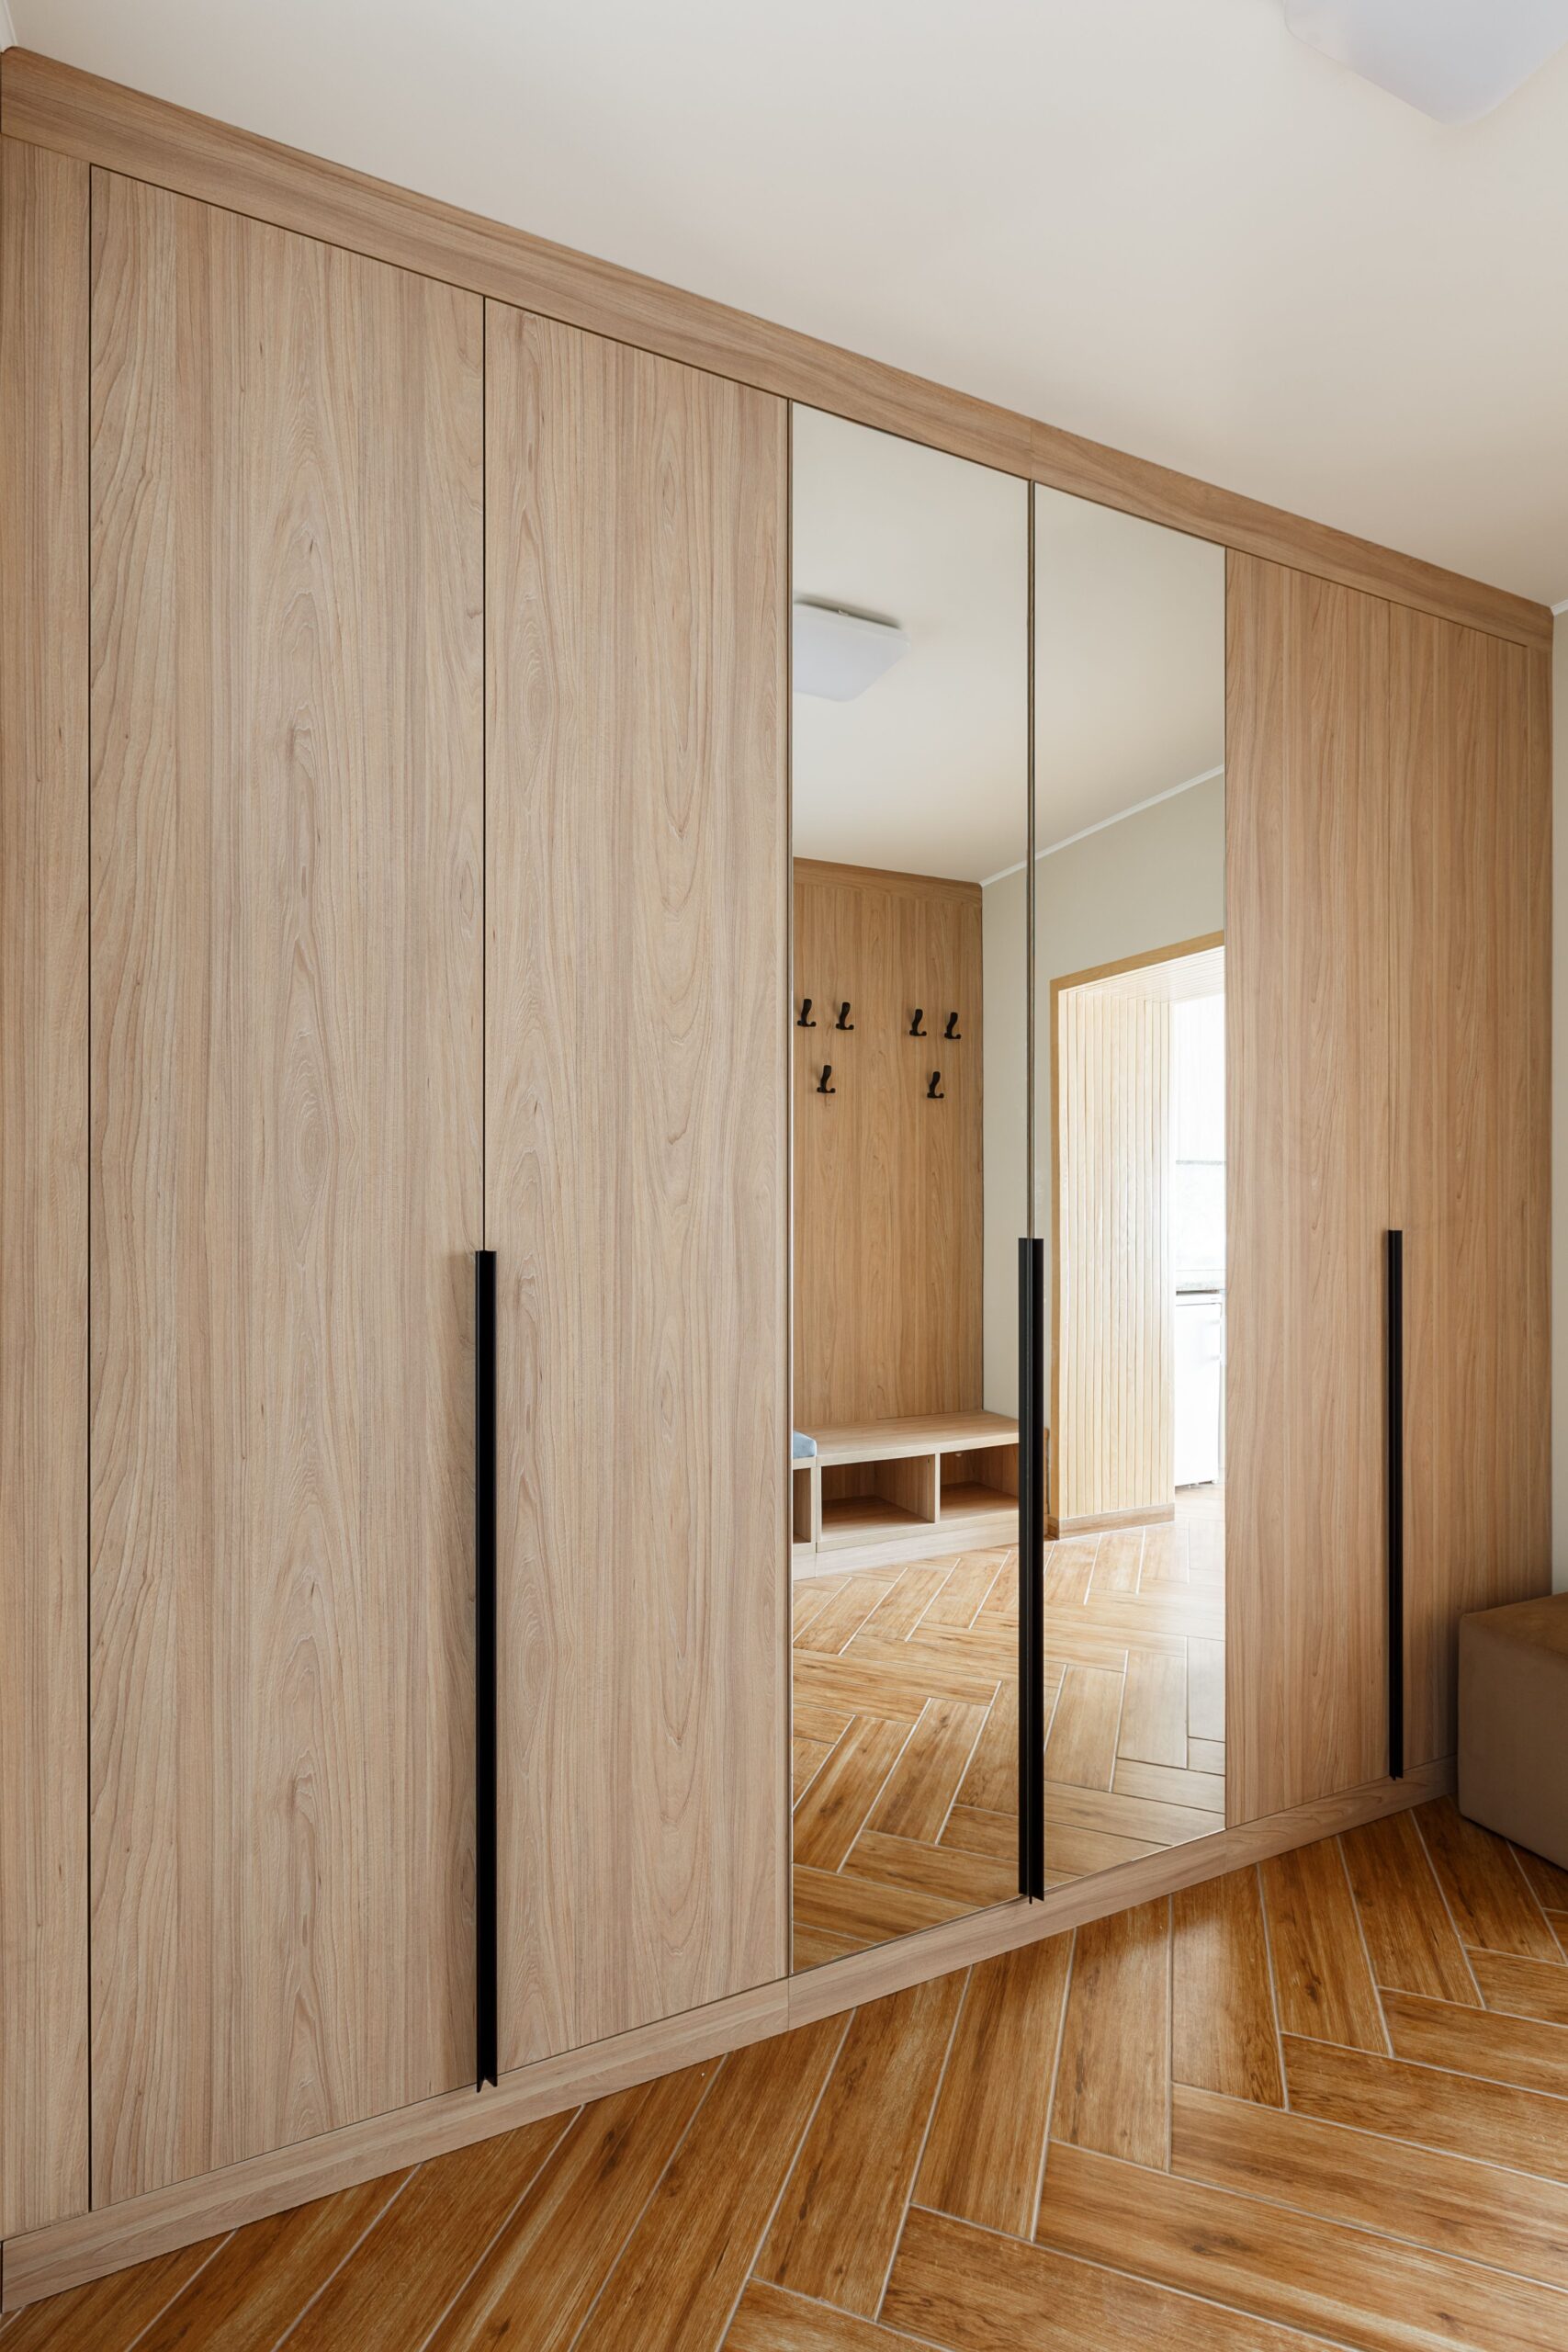 Selecting best wooden wardrobe for your
home